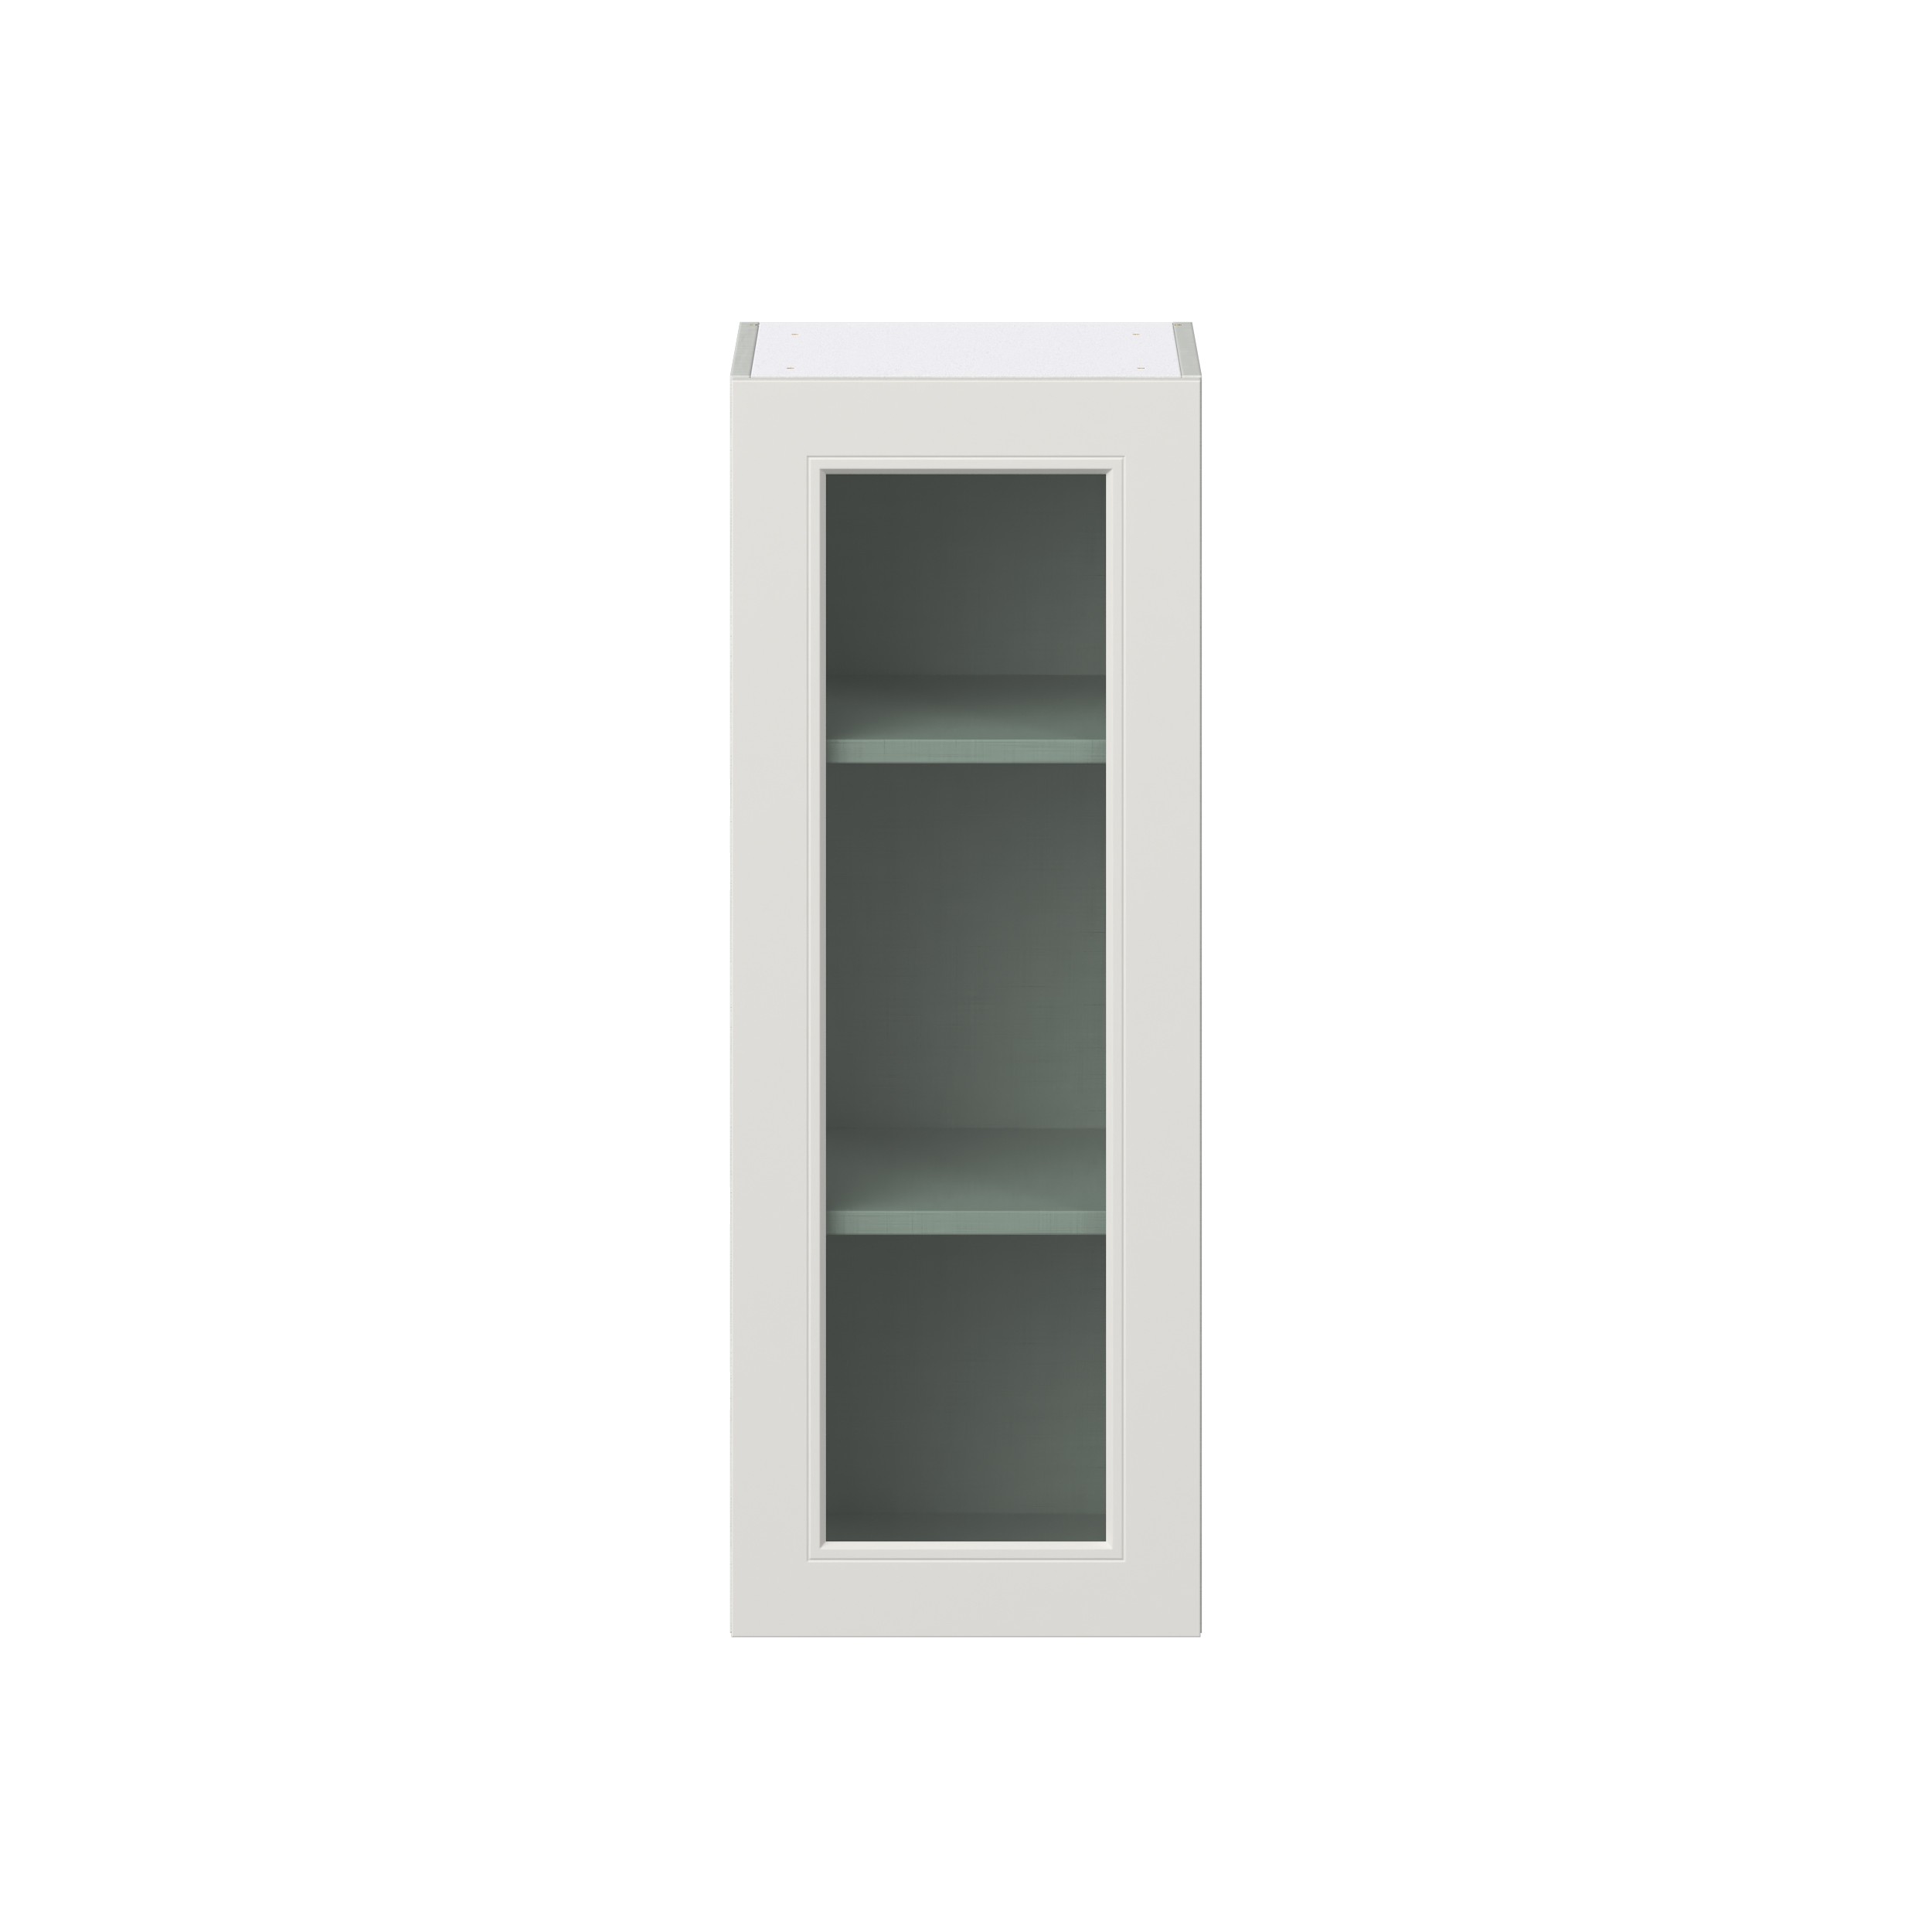 Wisteria Painted Light Gray Recessed Assembled Wall Cabinet with a Full High Glass Door (15 in. W x 40 in. H x 14 in. D)